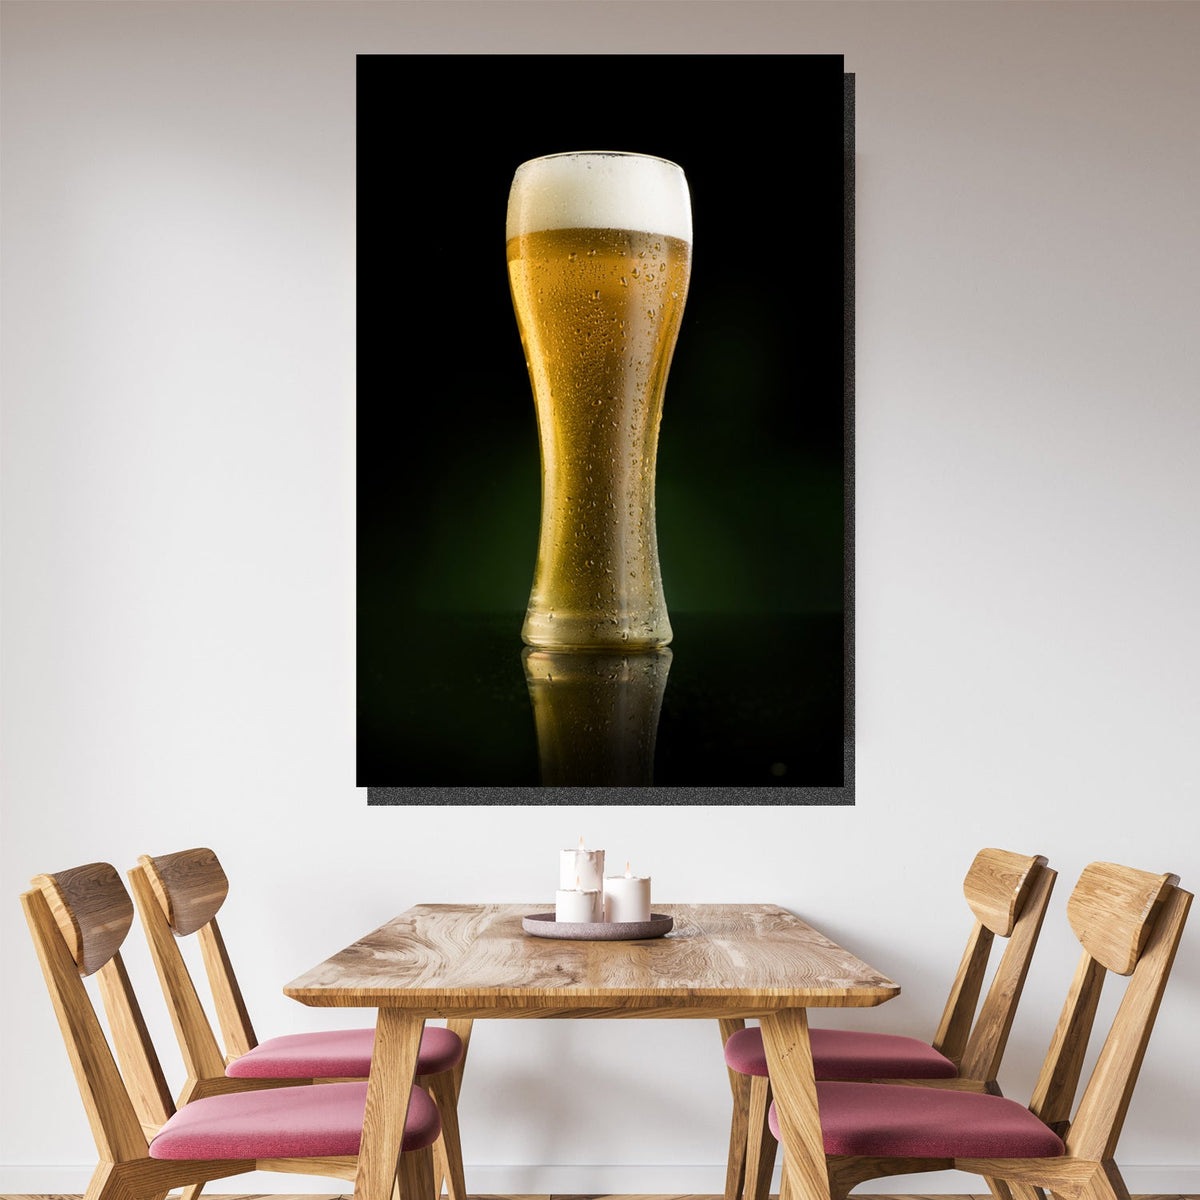 https://cdn.shopify.com/s/files/1/0387/9986/8044/products/FrostedGlassofBeerCanvasArtprintStretched-4.jpg